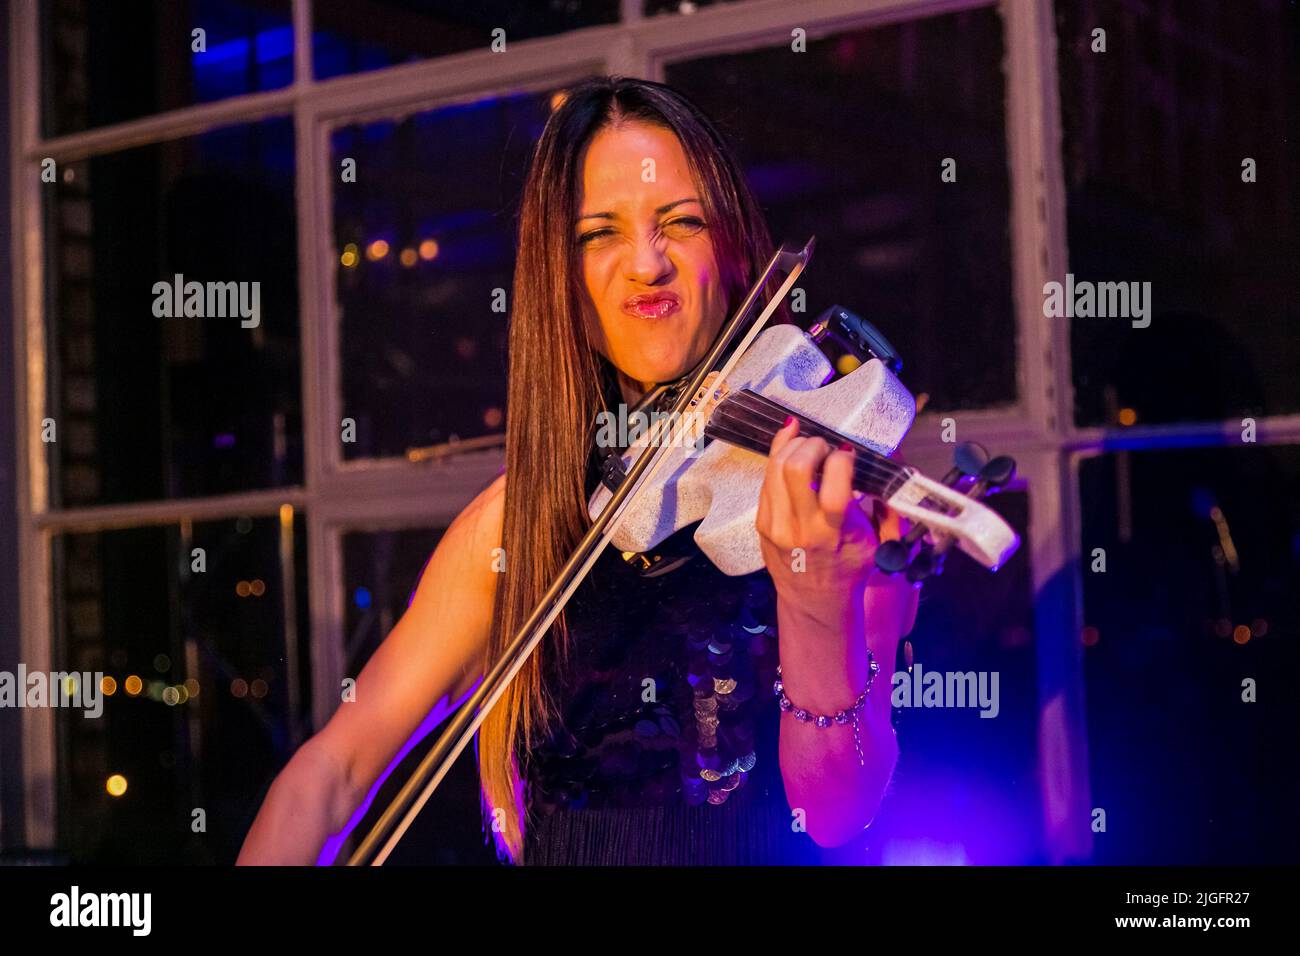 A female musician playing the violin at party event Stock Photo